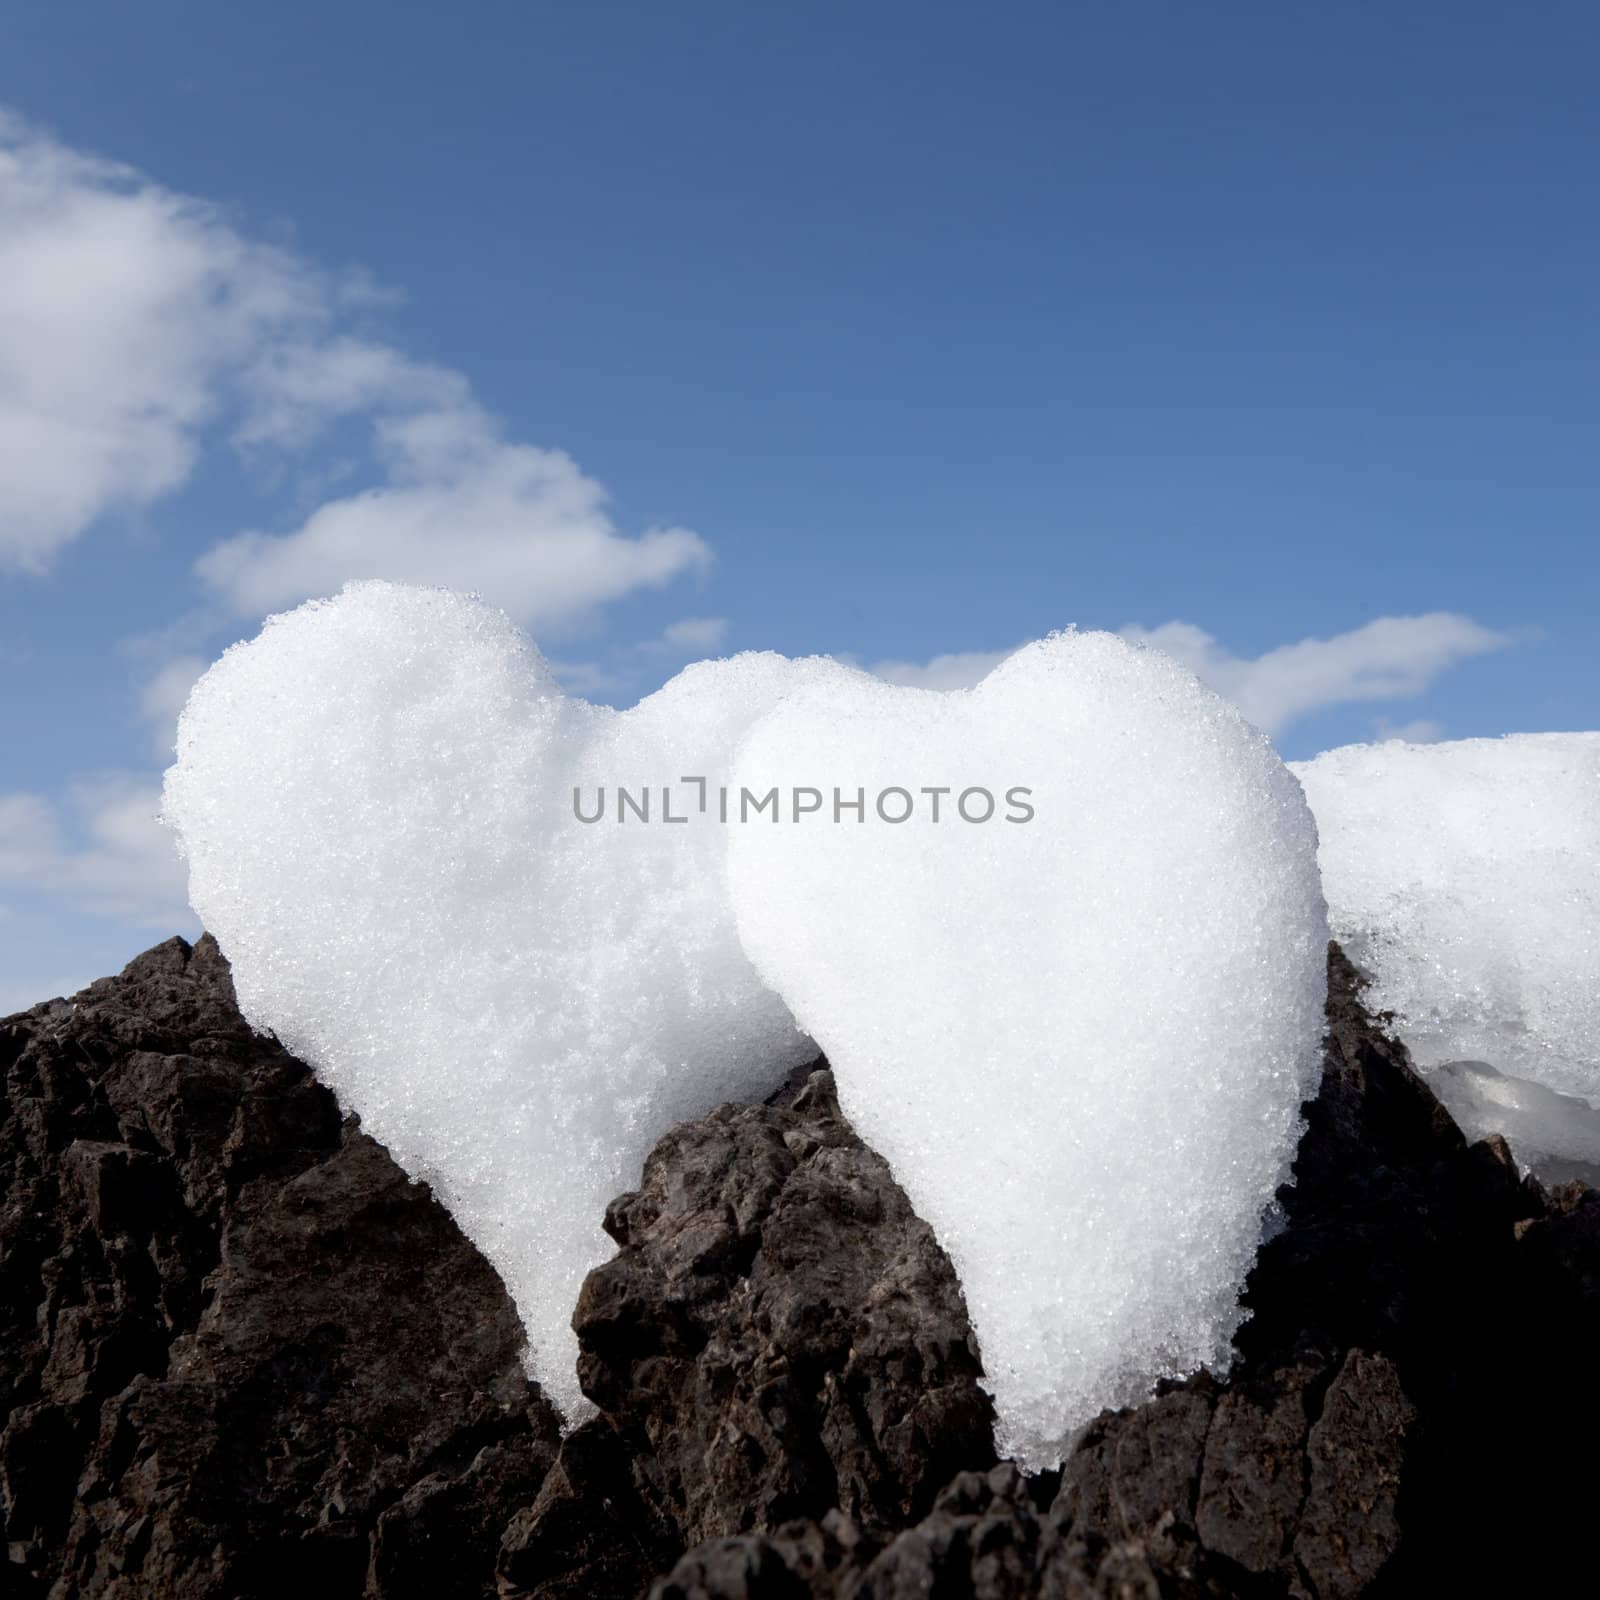 Two Valentine�s Day Hearts formed from snow on rock with blue sky.